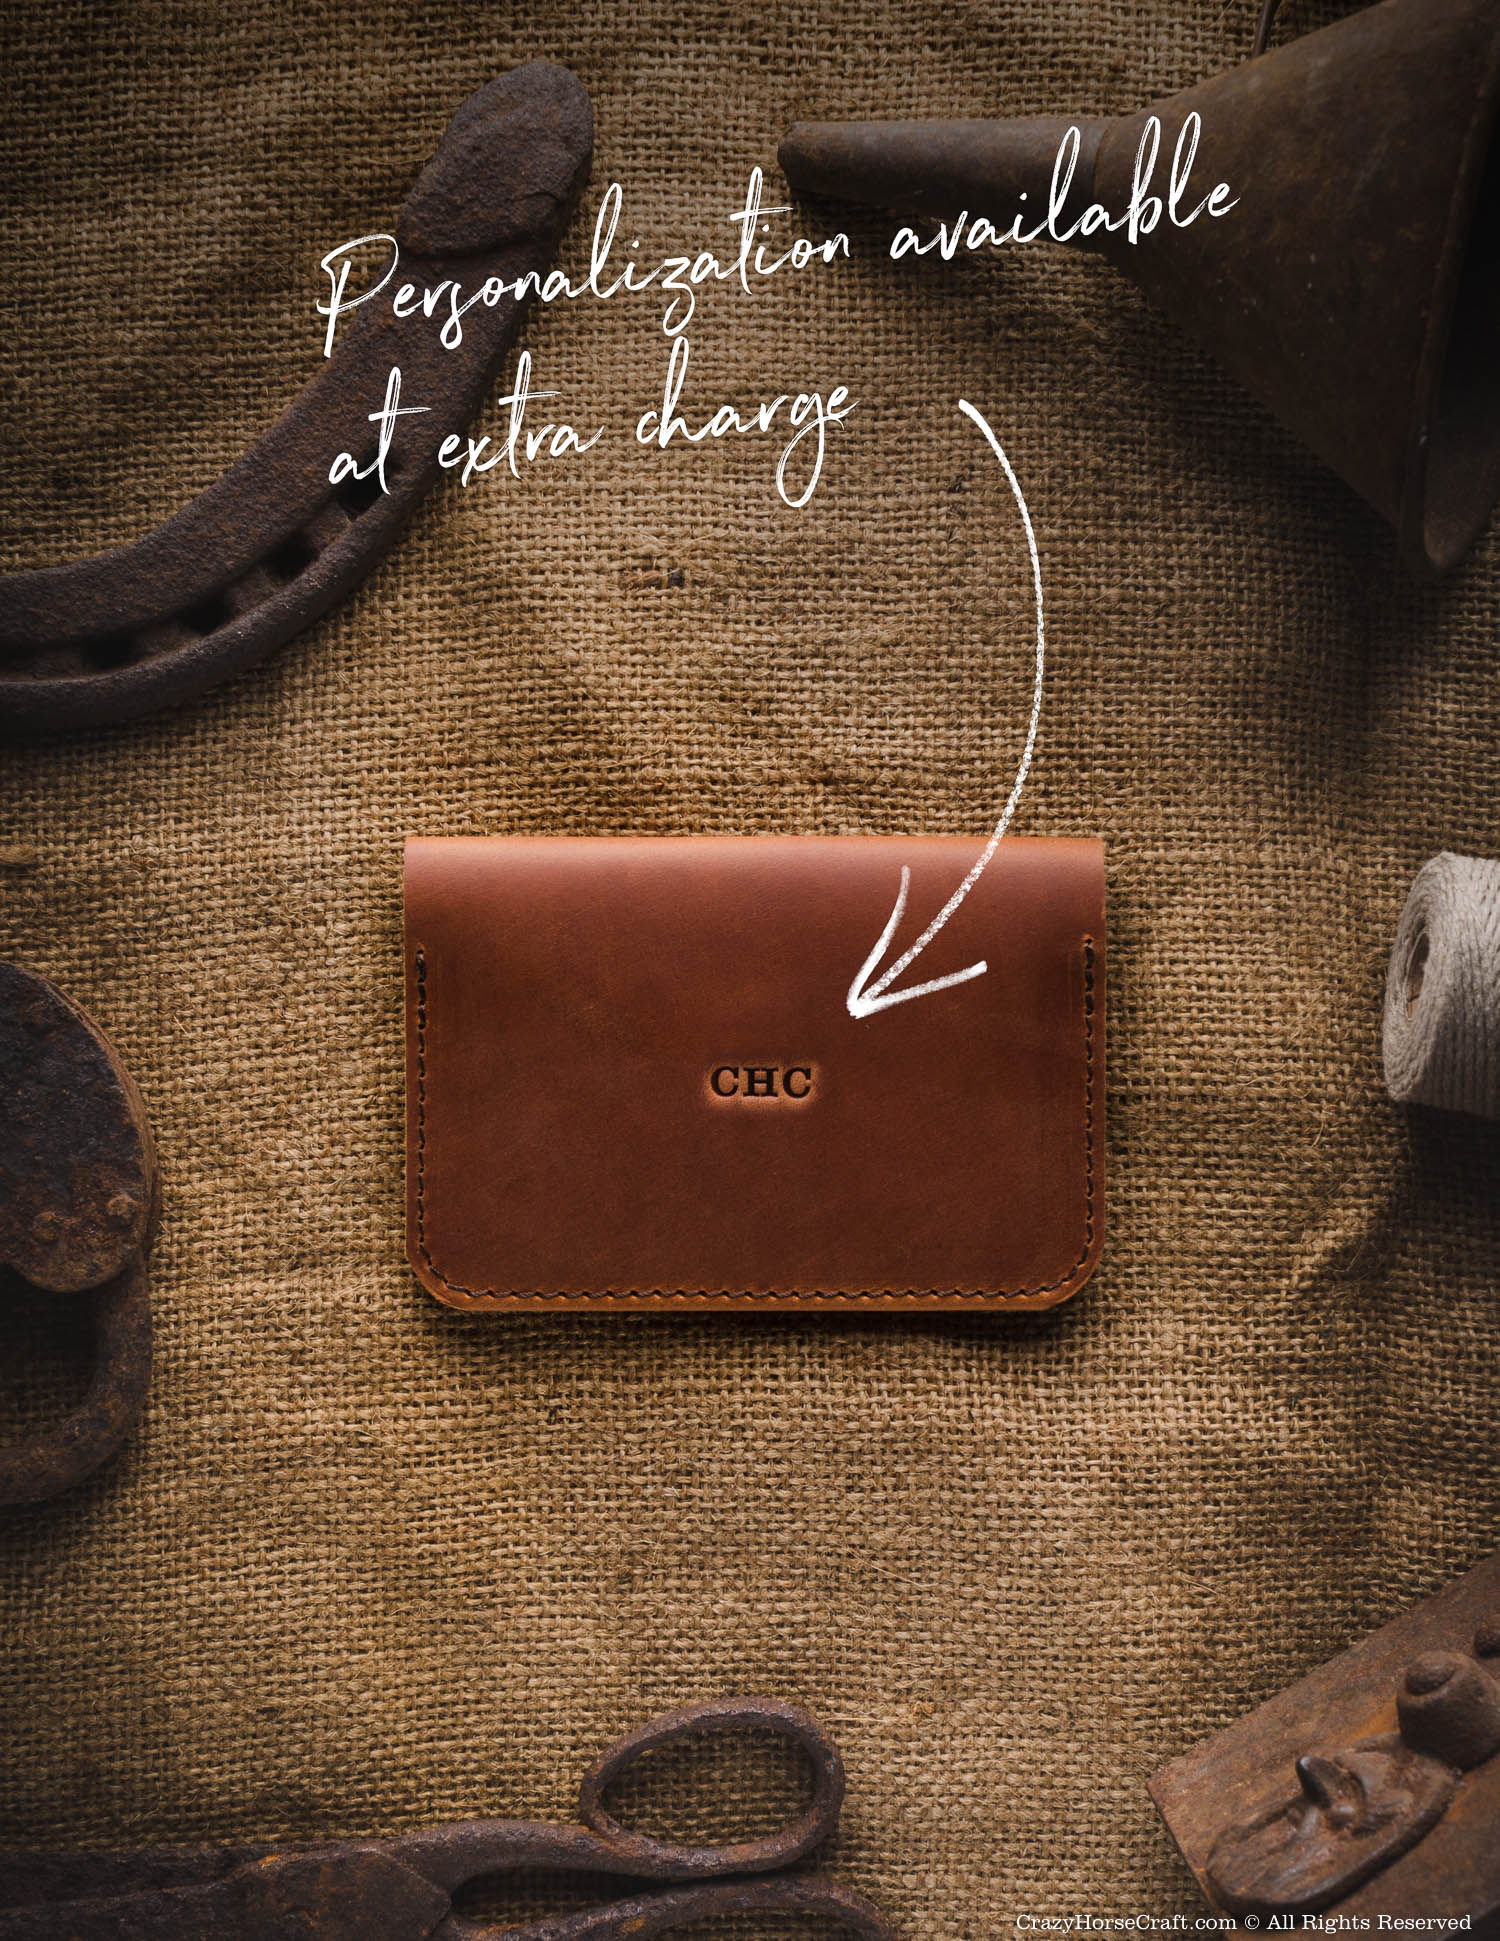 Long Wallet Personalized Wallet from high quality Italian leather!